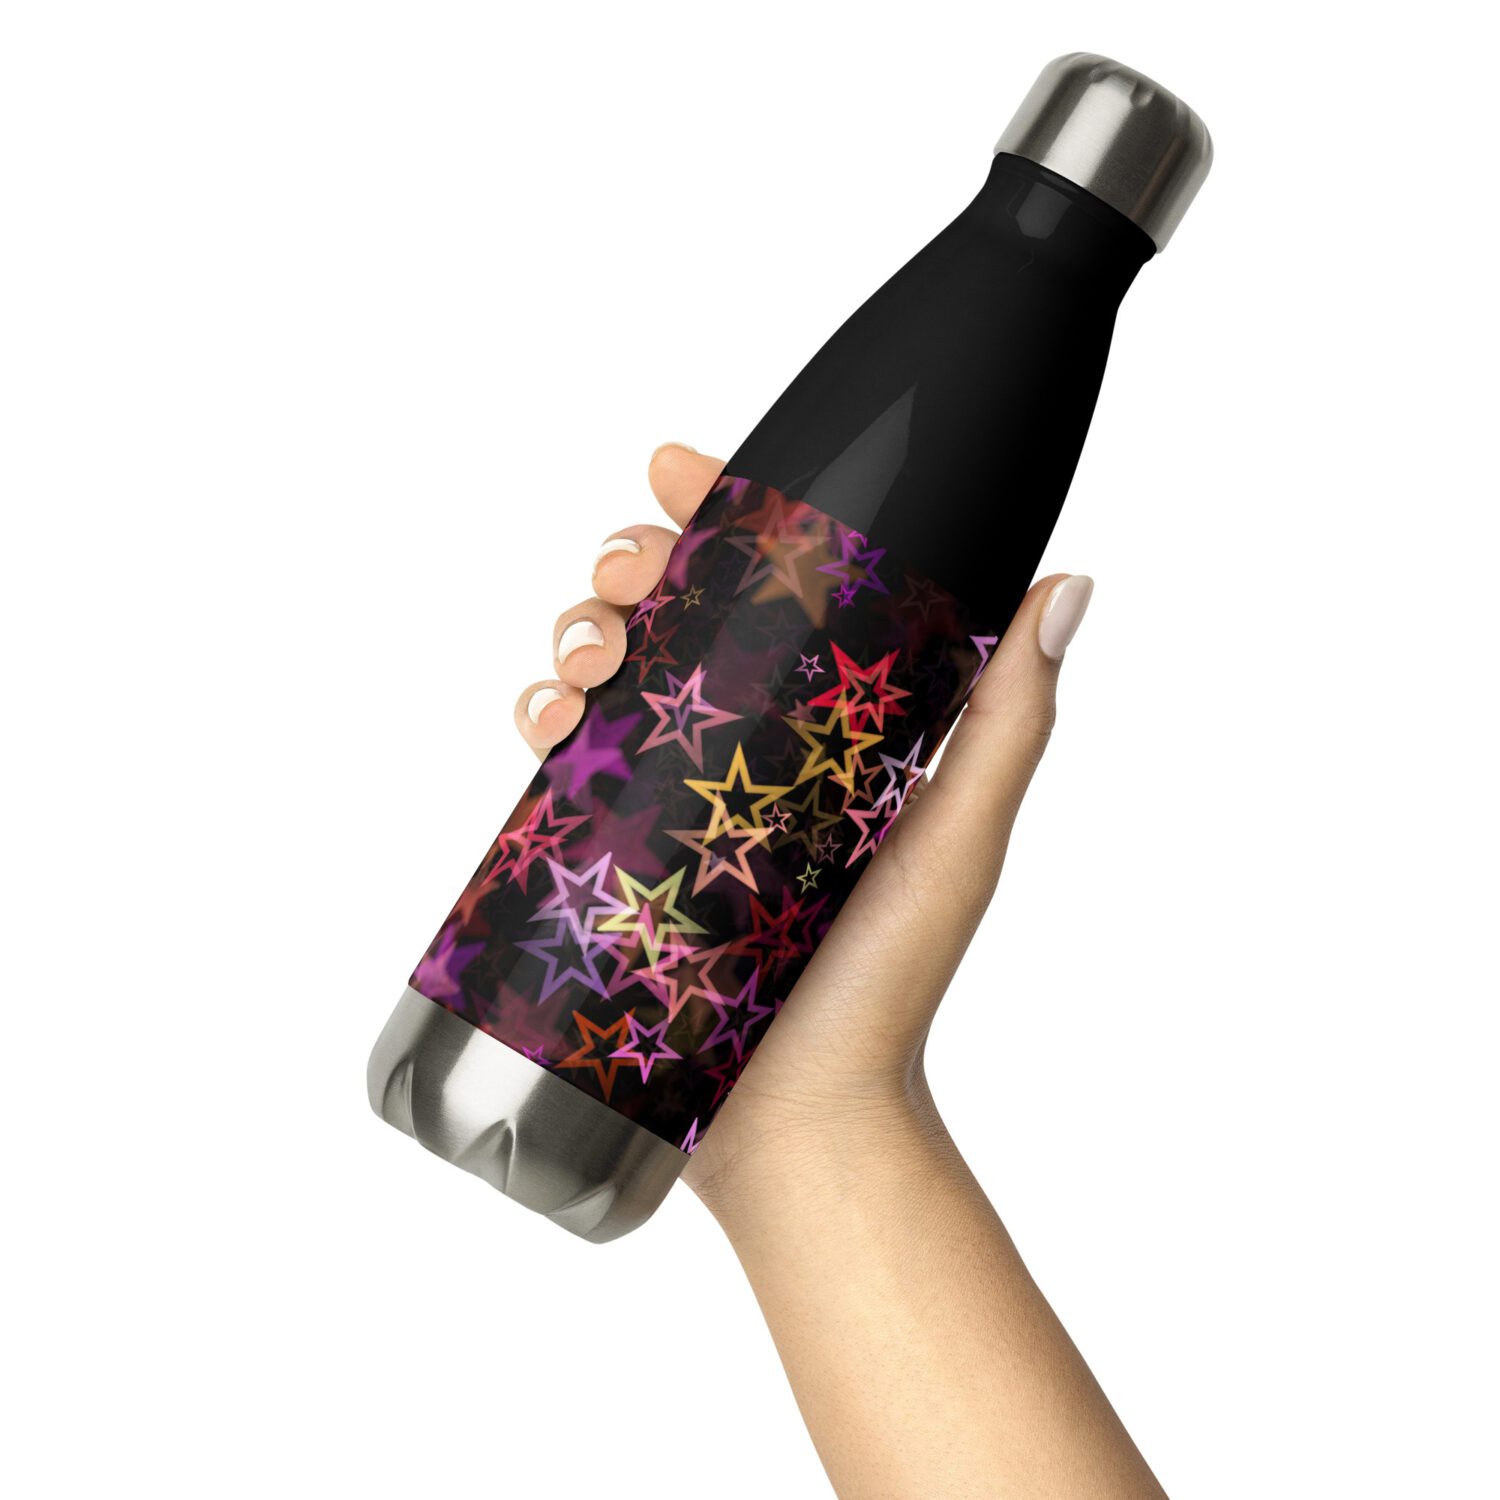 Stainless Steel Water Bottle “You are a Star”